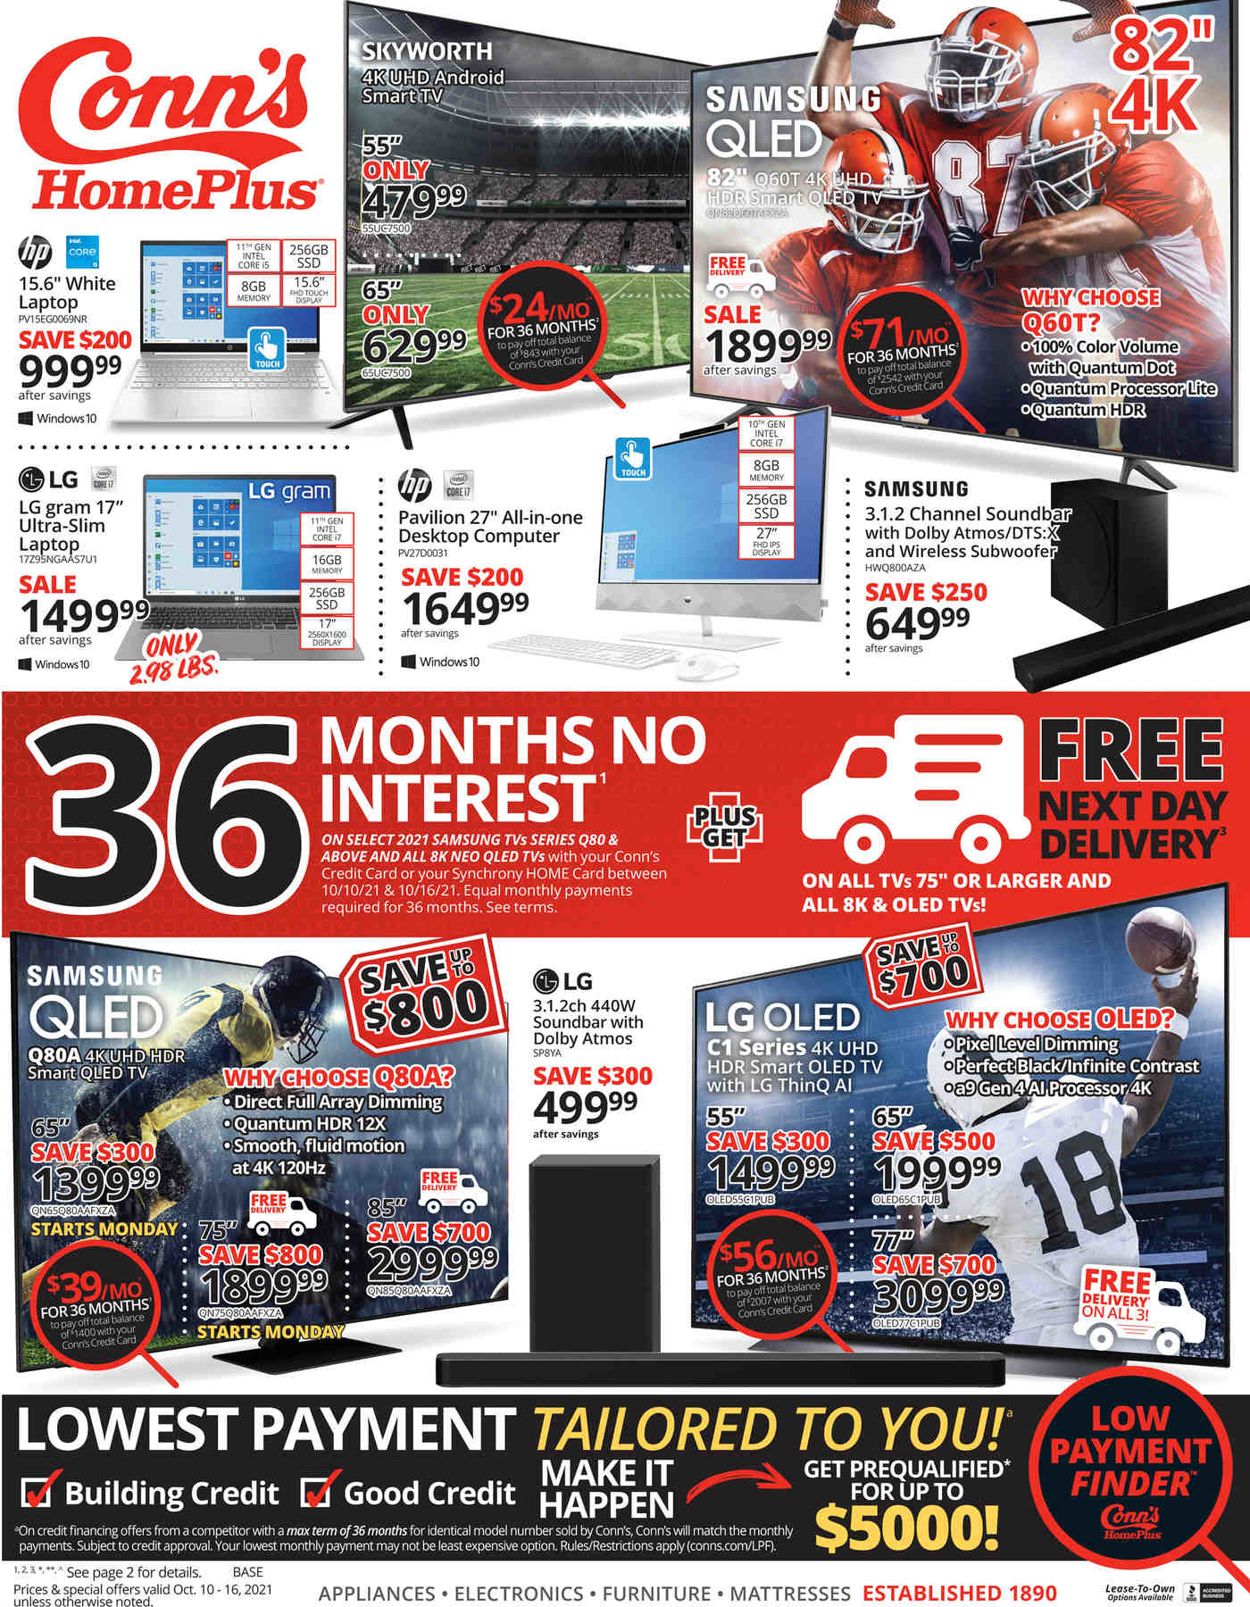 Conn's Home Plus Weekly Ad Circular - valid 10/10-10/16/2021